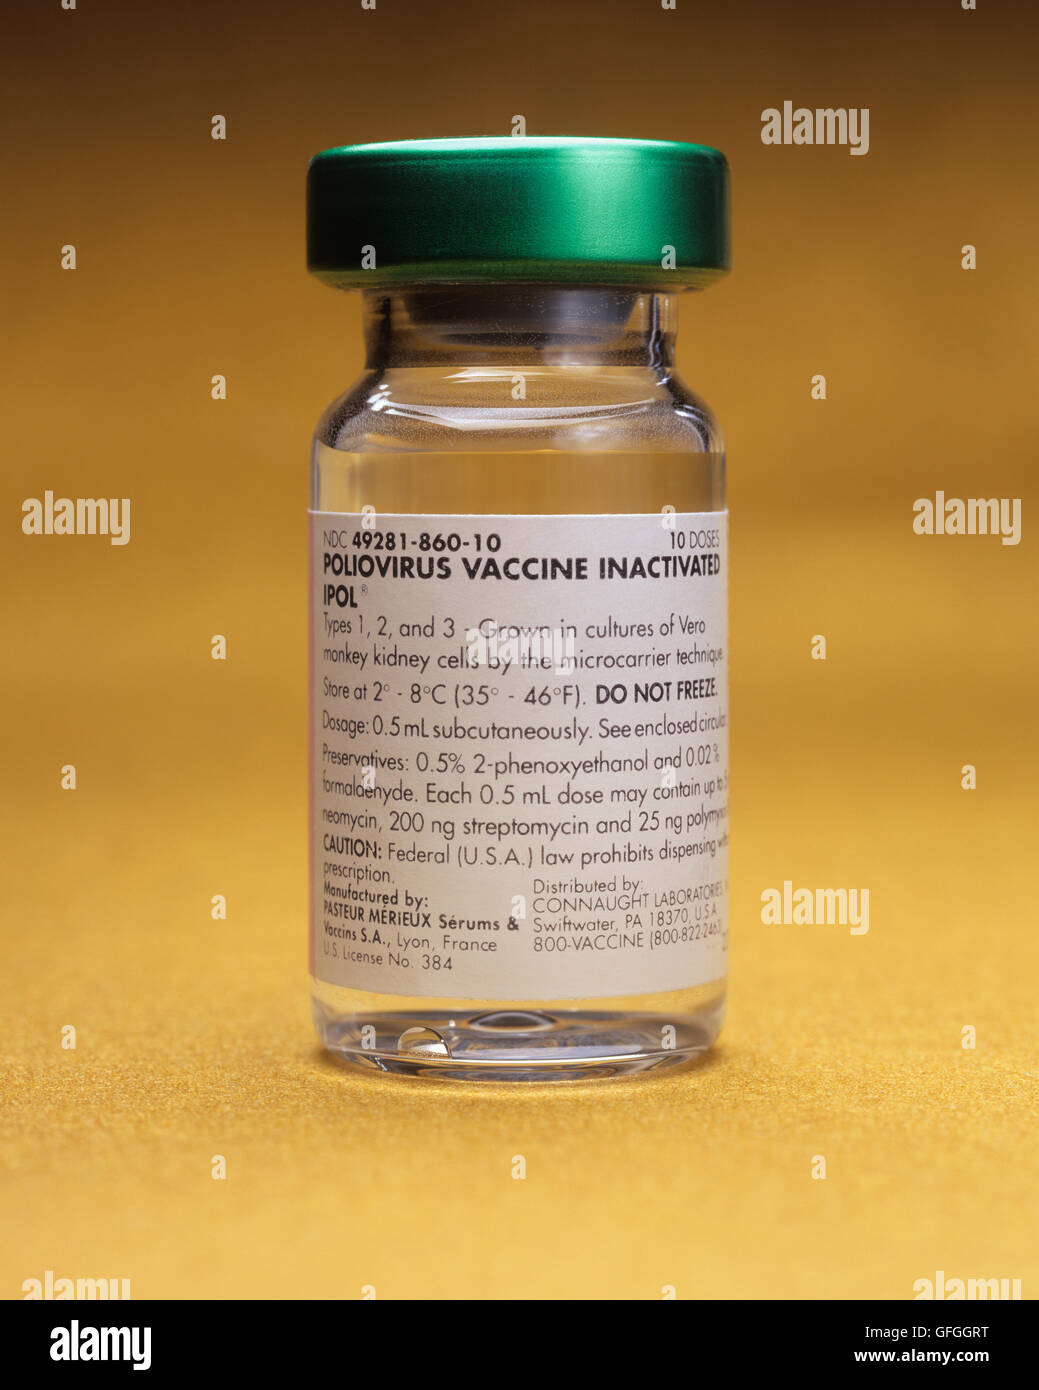 A vial of Poliovirus Vaccine Inactivated Stock Photo